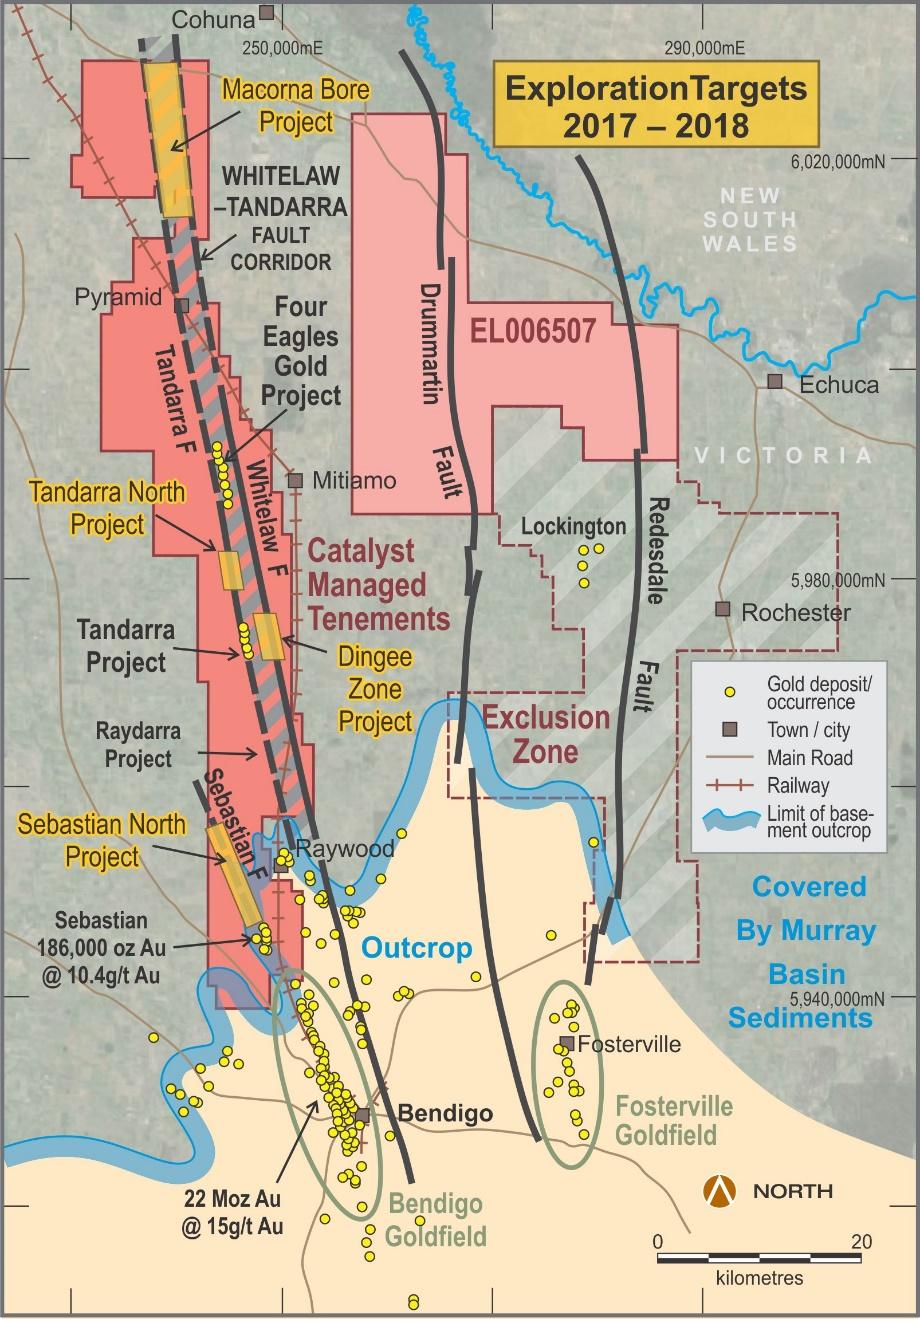 Control of Entire Whitelaw Gold Corridor Bendigo produced 22 million ounces of gold at 15g/t Au Gold corridor continues north of Bendigo Totally concealed